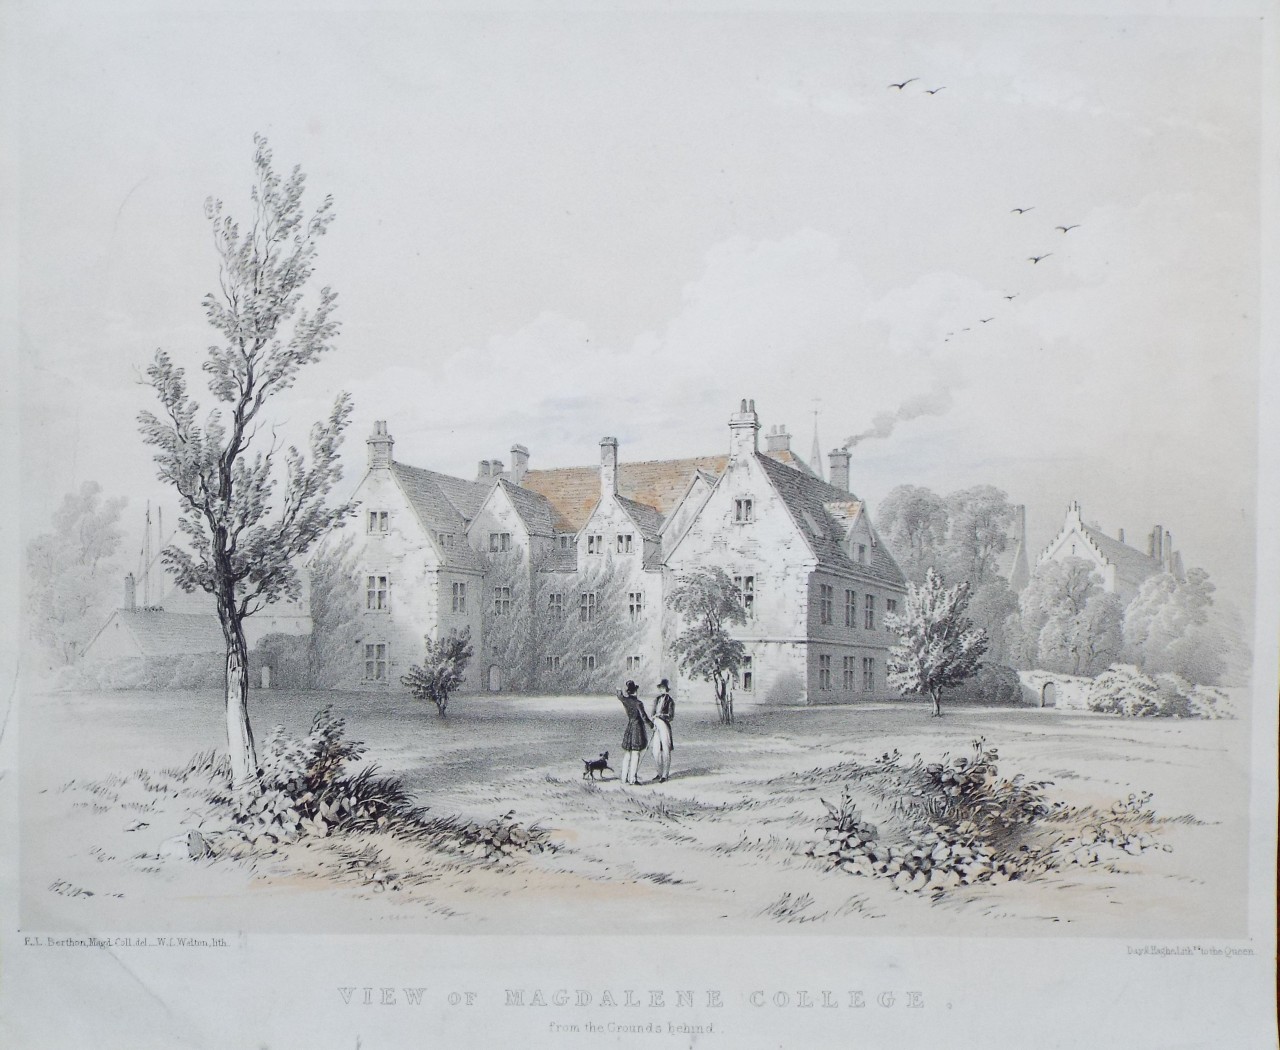 Lithograph - View of Magdalene College, from the Grounds behind. - Walton